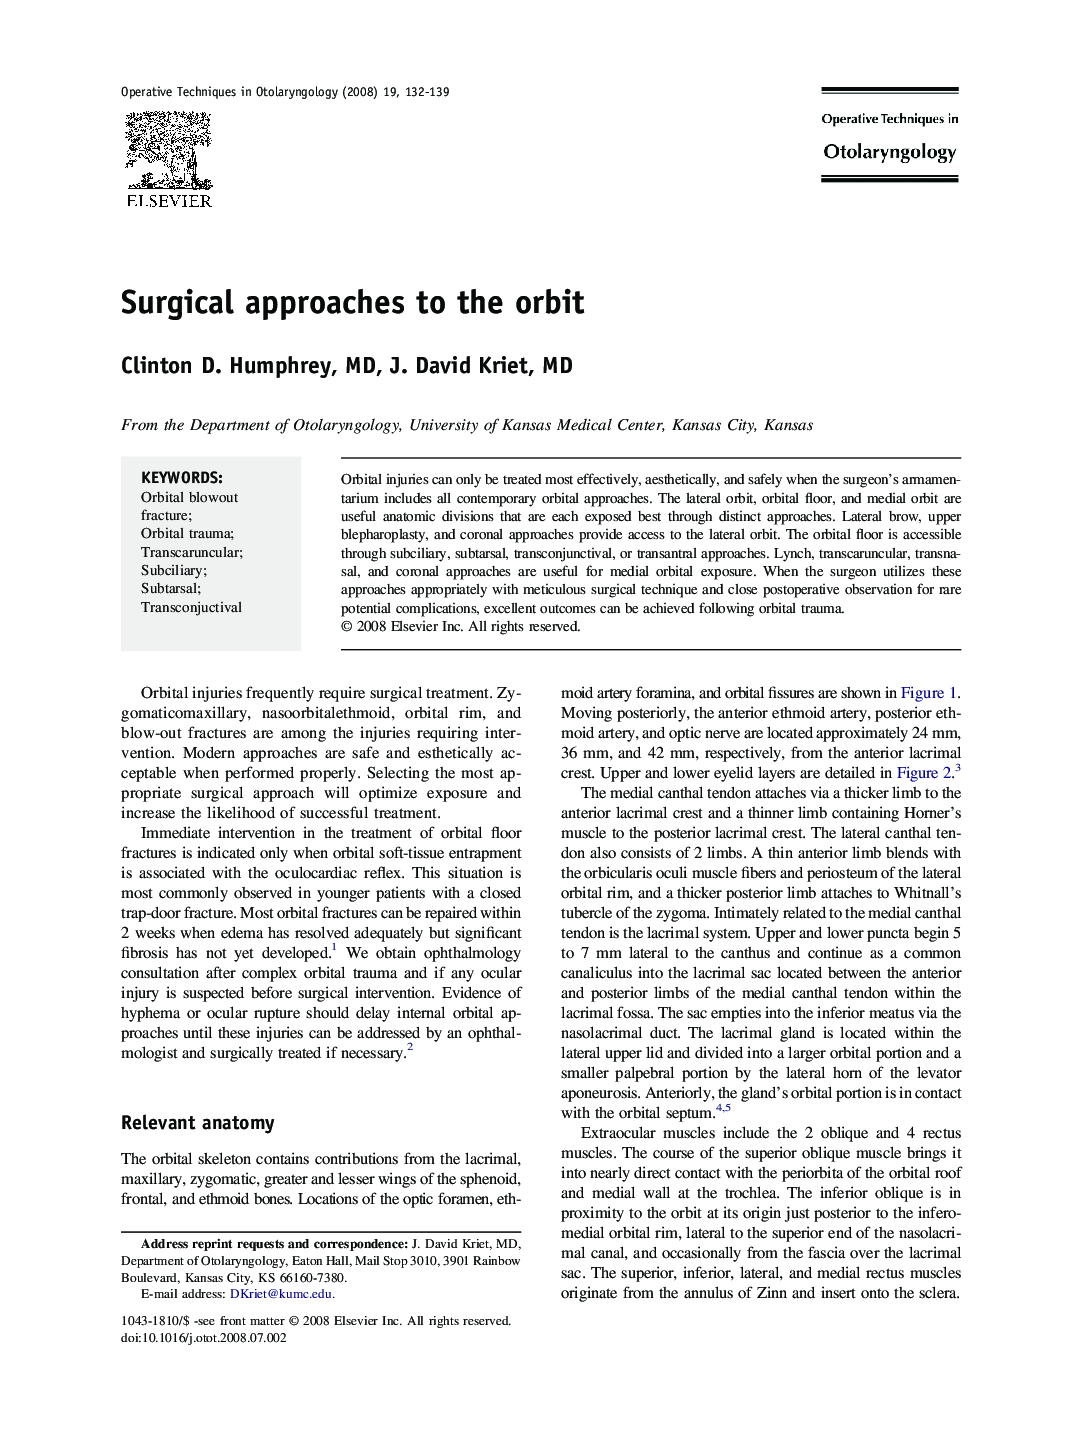 Surgical approaches to the orbit